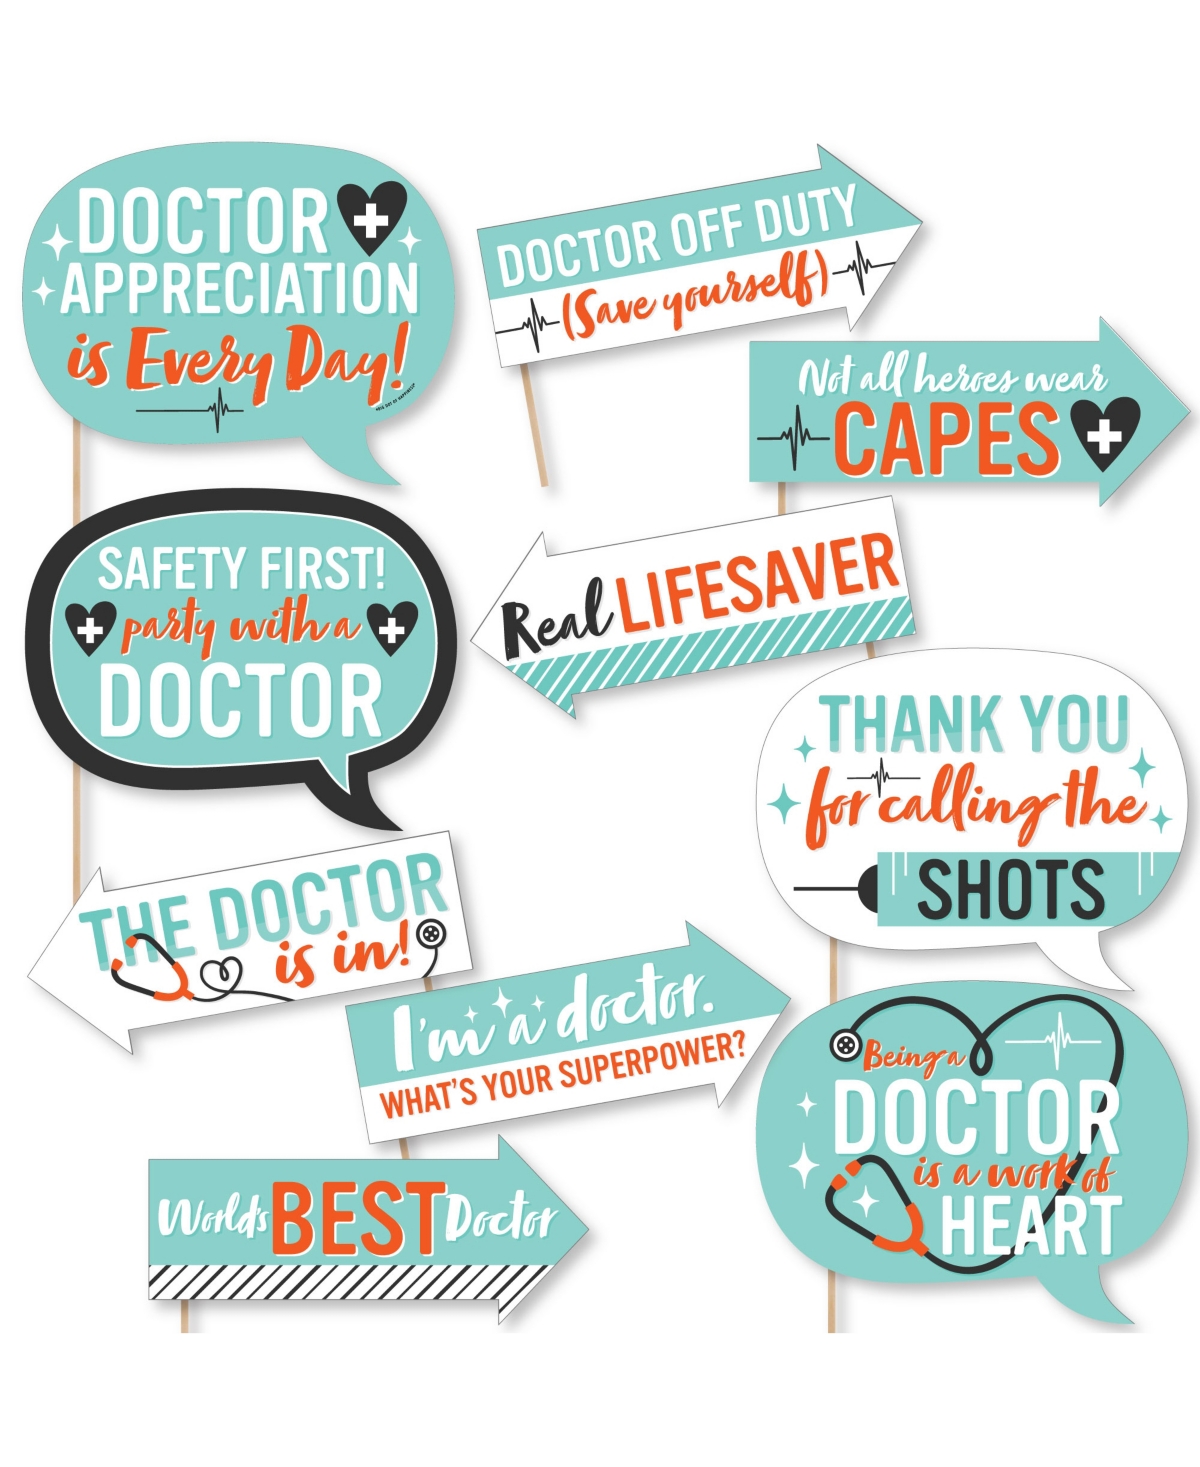 Funny Thank You Doctors - Doctor Appreciation Week Photo Booth Props Kit - 10 Pc